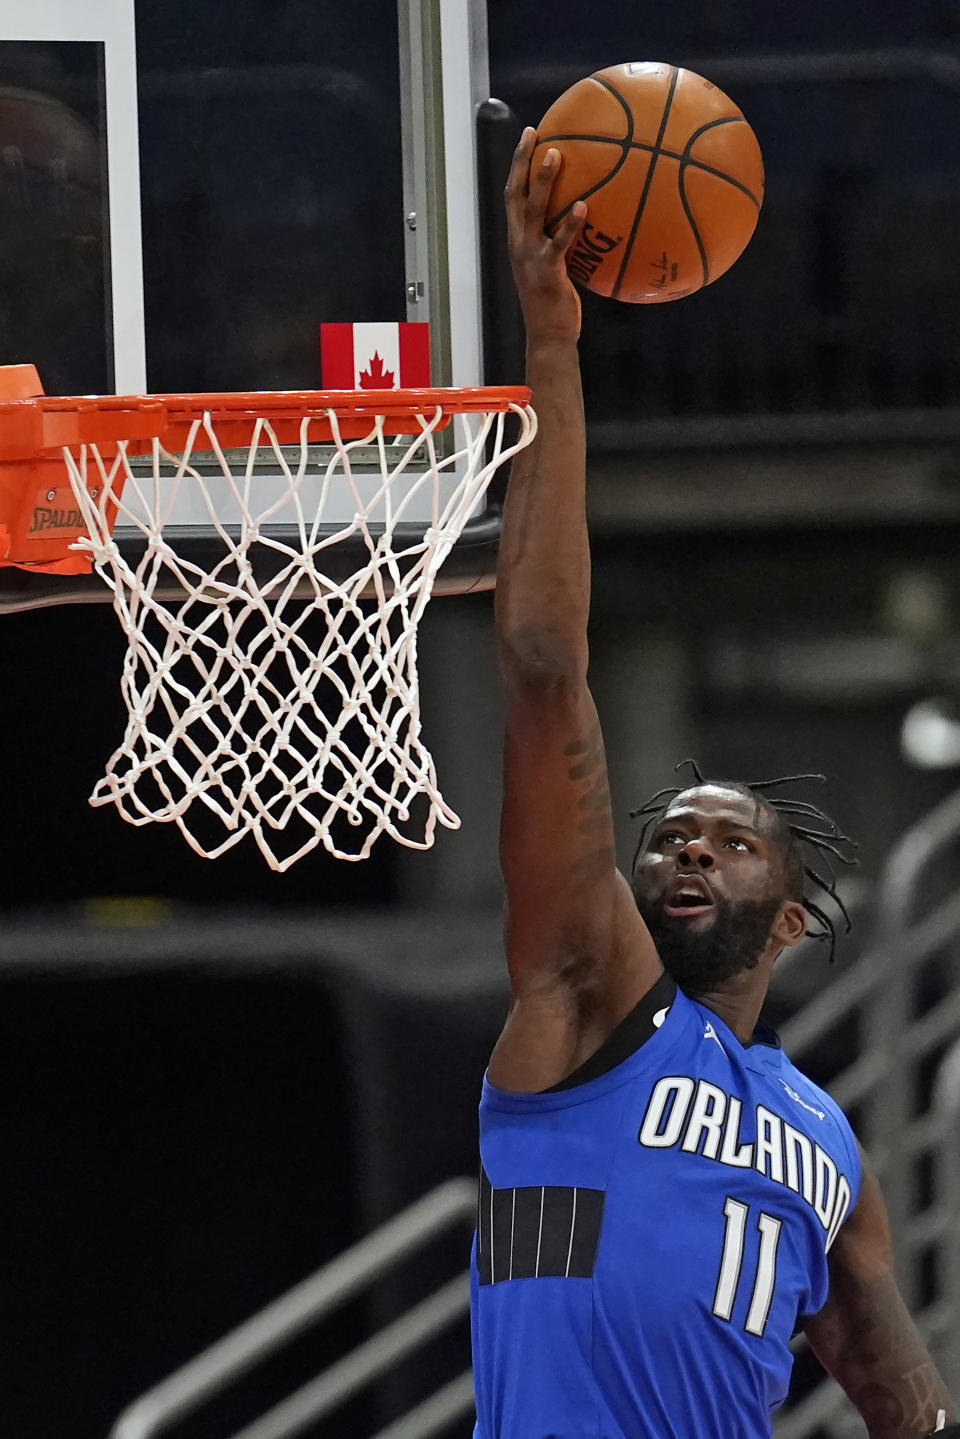 Orlando Magic forward James Ennis III (11) goes up for a shot during the first half of an NBA basketball game against the Toronto Raptors Sunday, Jan. 31, 2021, in Tampa, Fla. (AP Photo/Chris O'Meara)